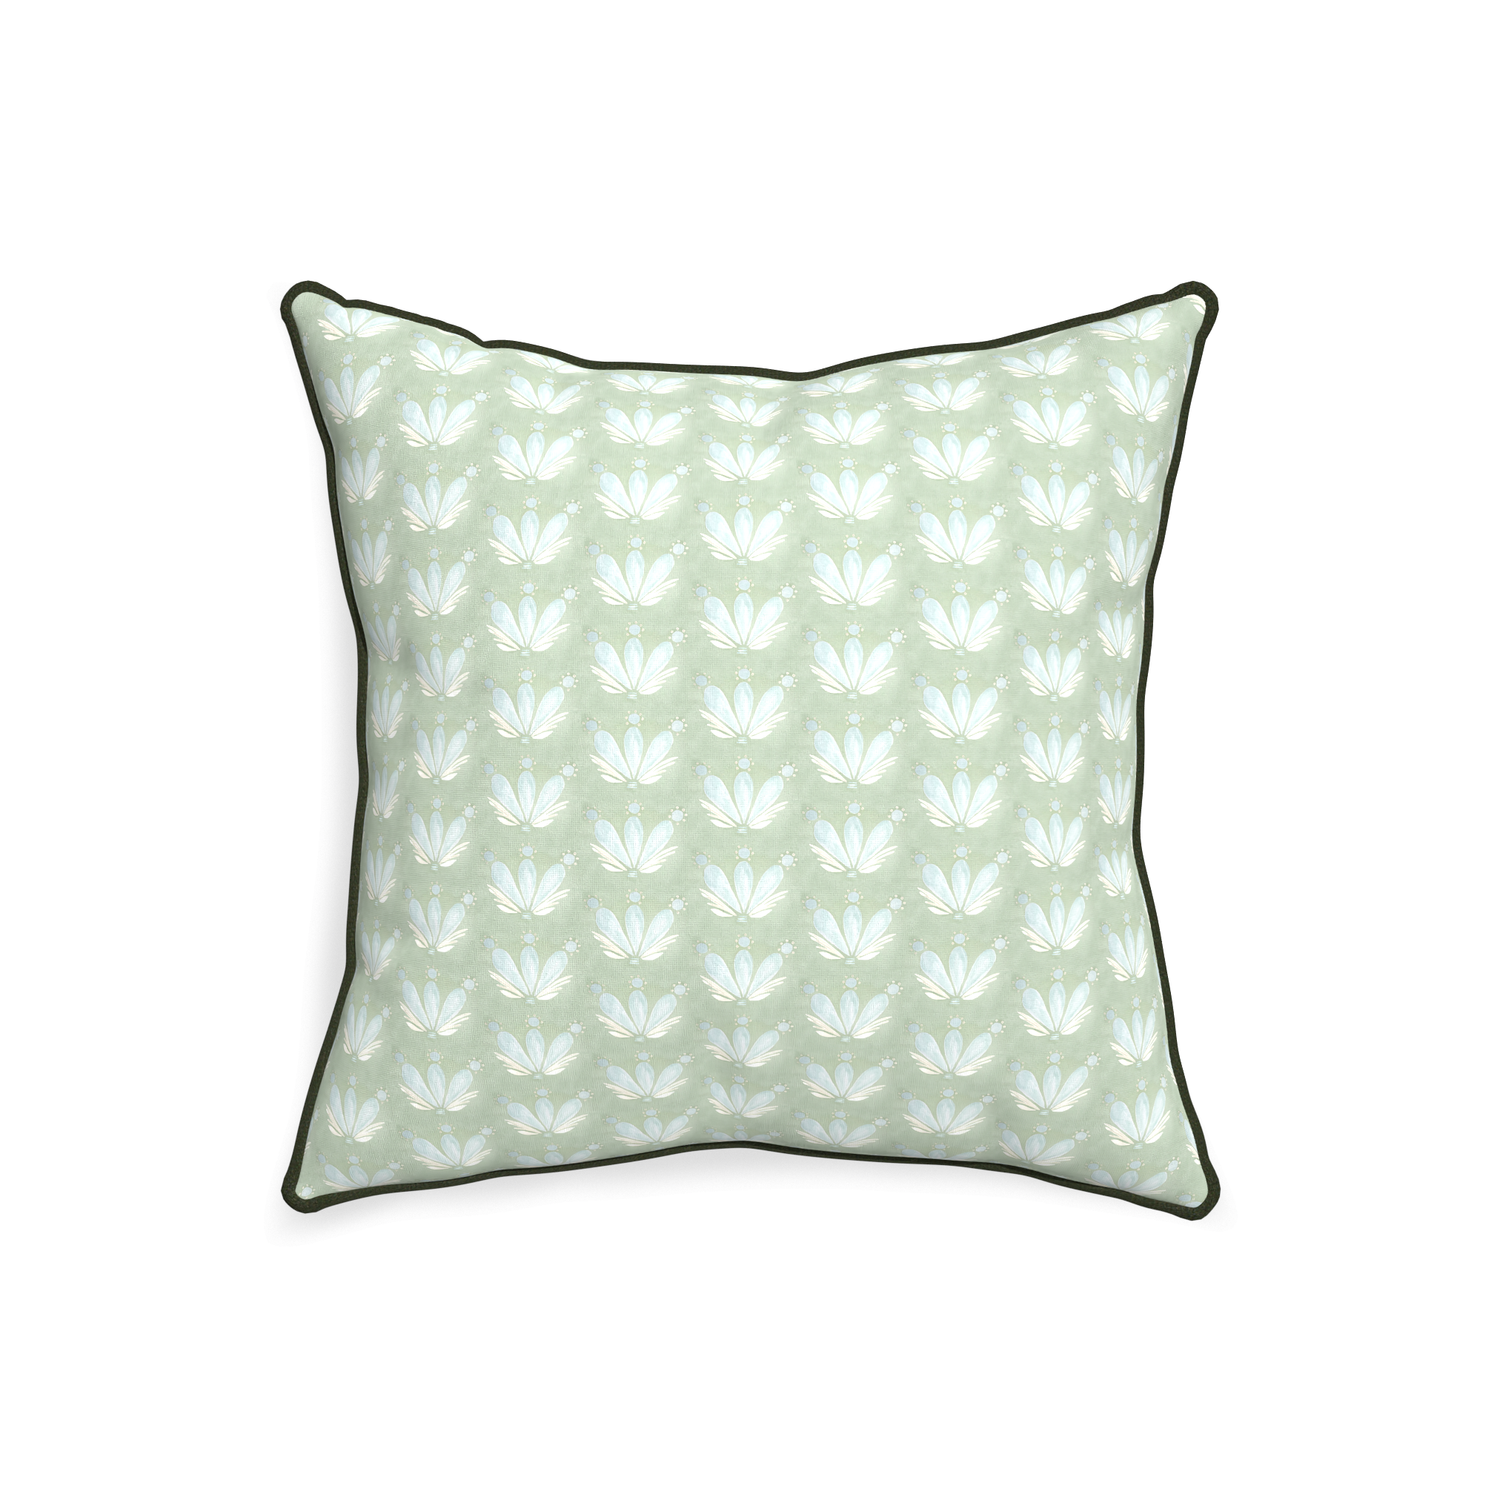 20-square serena sea salt custom blue & green floral drop repeatpillow with f piping on white background